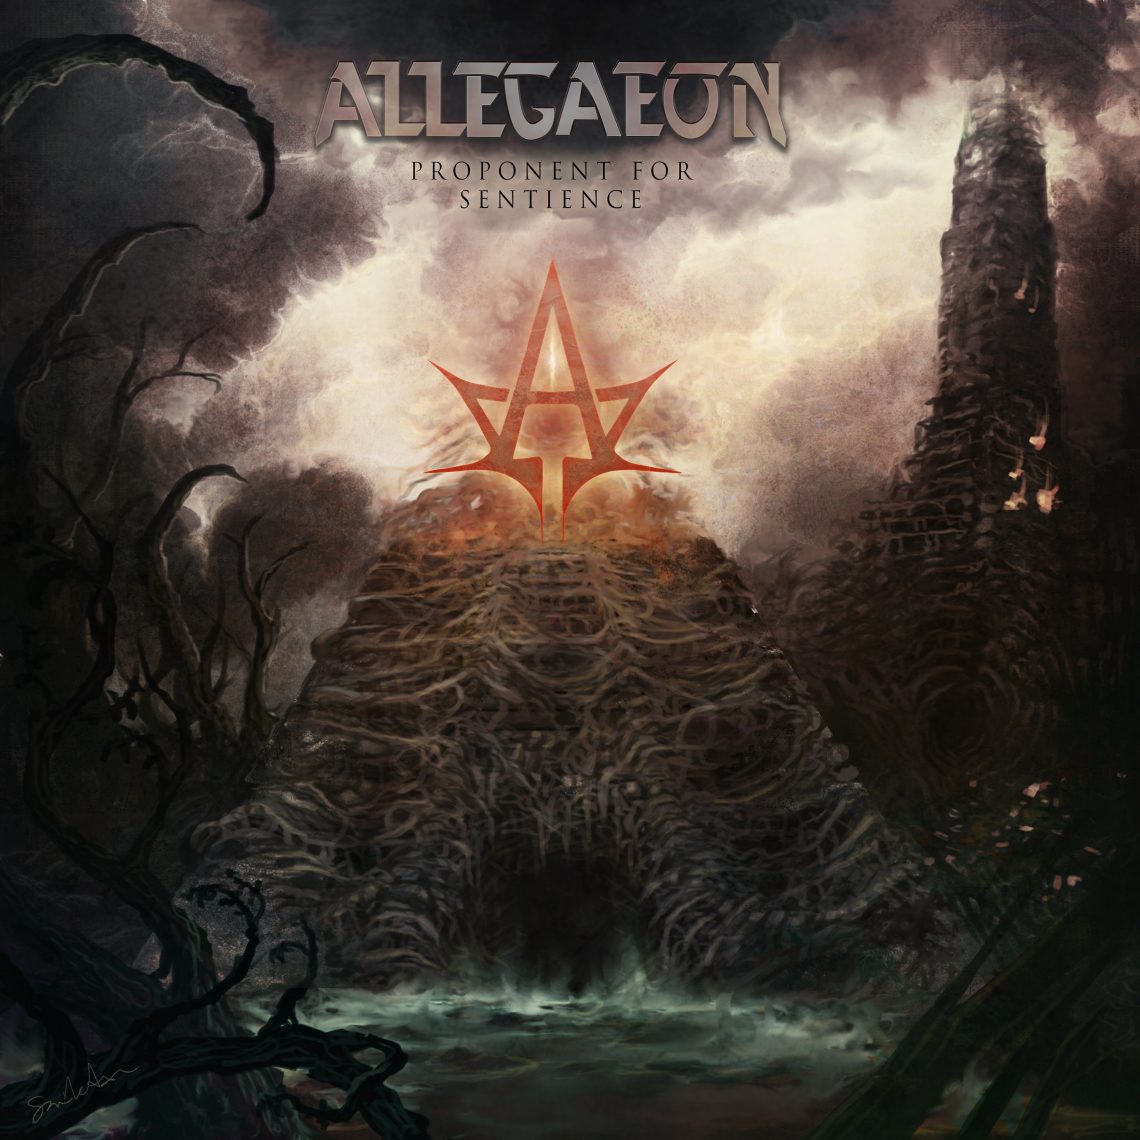 Allegaeon – Proponent for Sentience CD Review